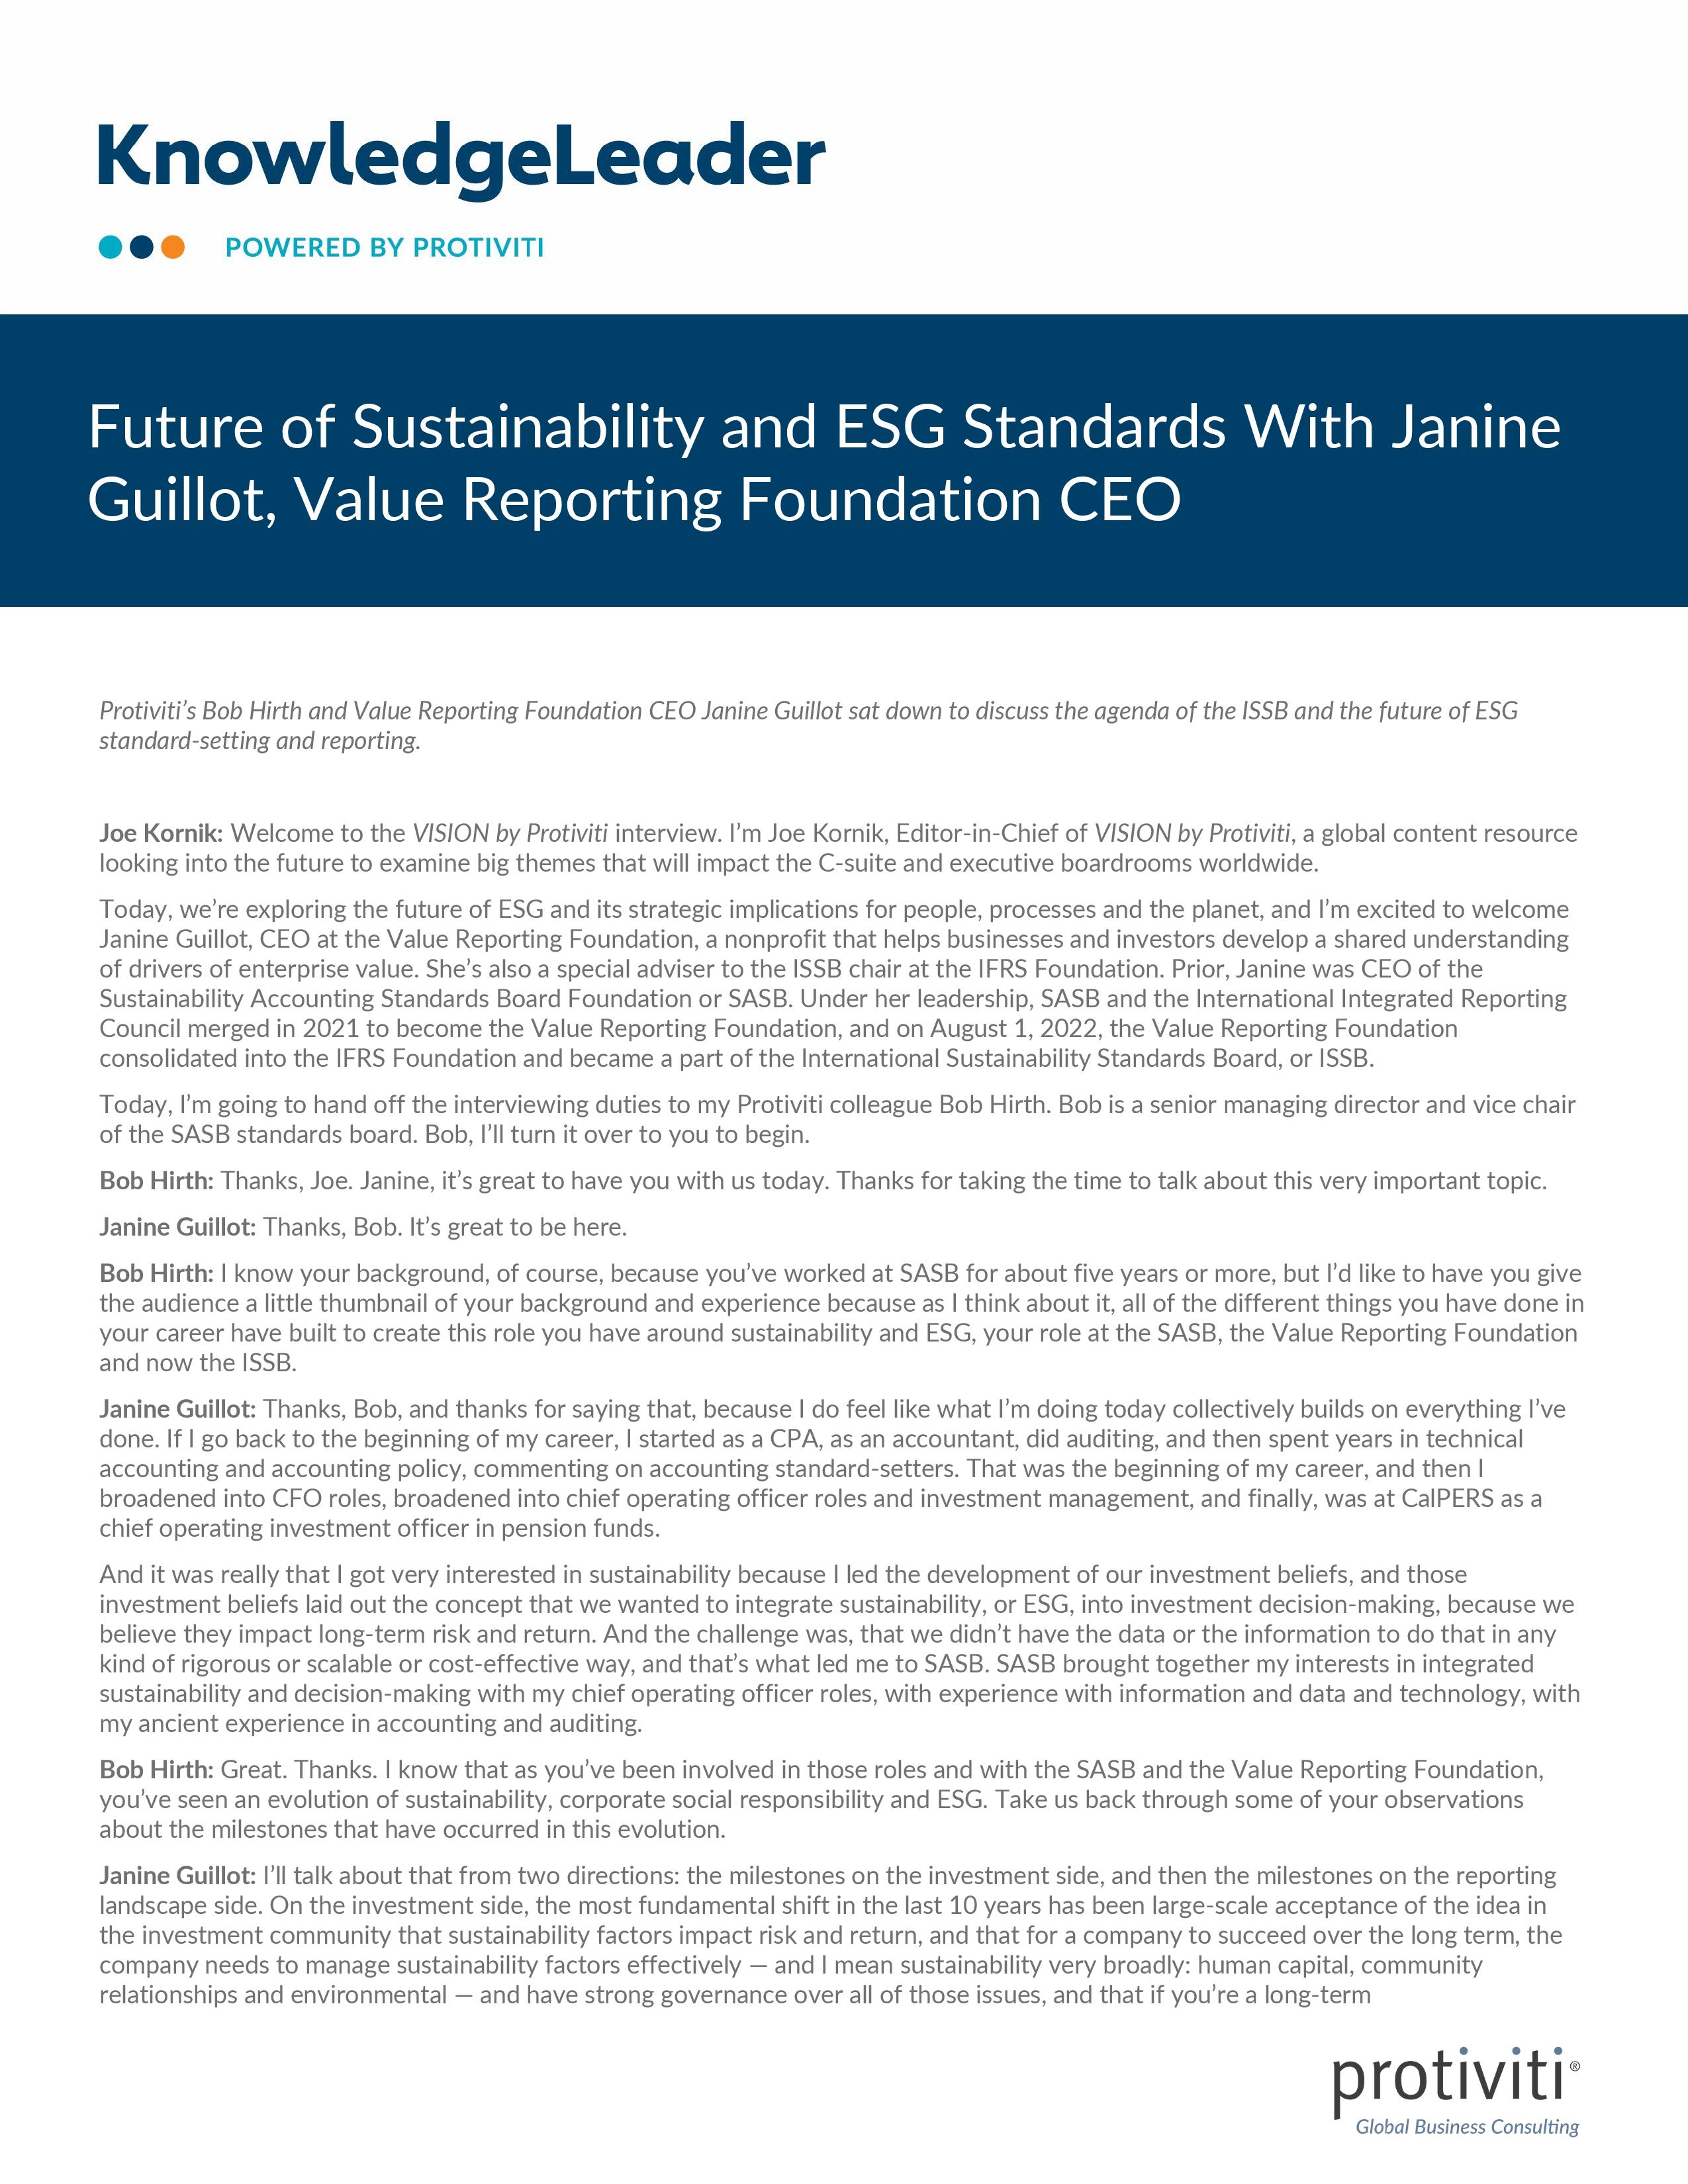 screenshot of the first page of Future of Sustainability and ESG Standards With Janine Guillot, Value Reporting Foundation CEO